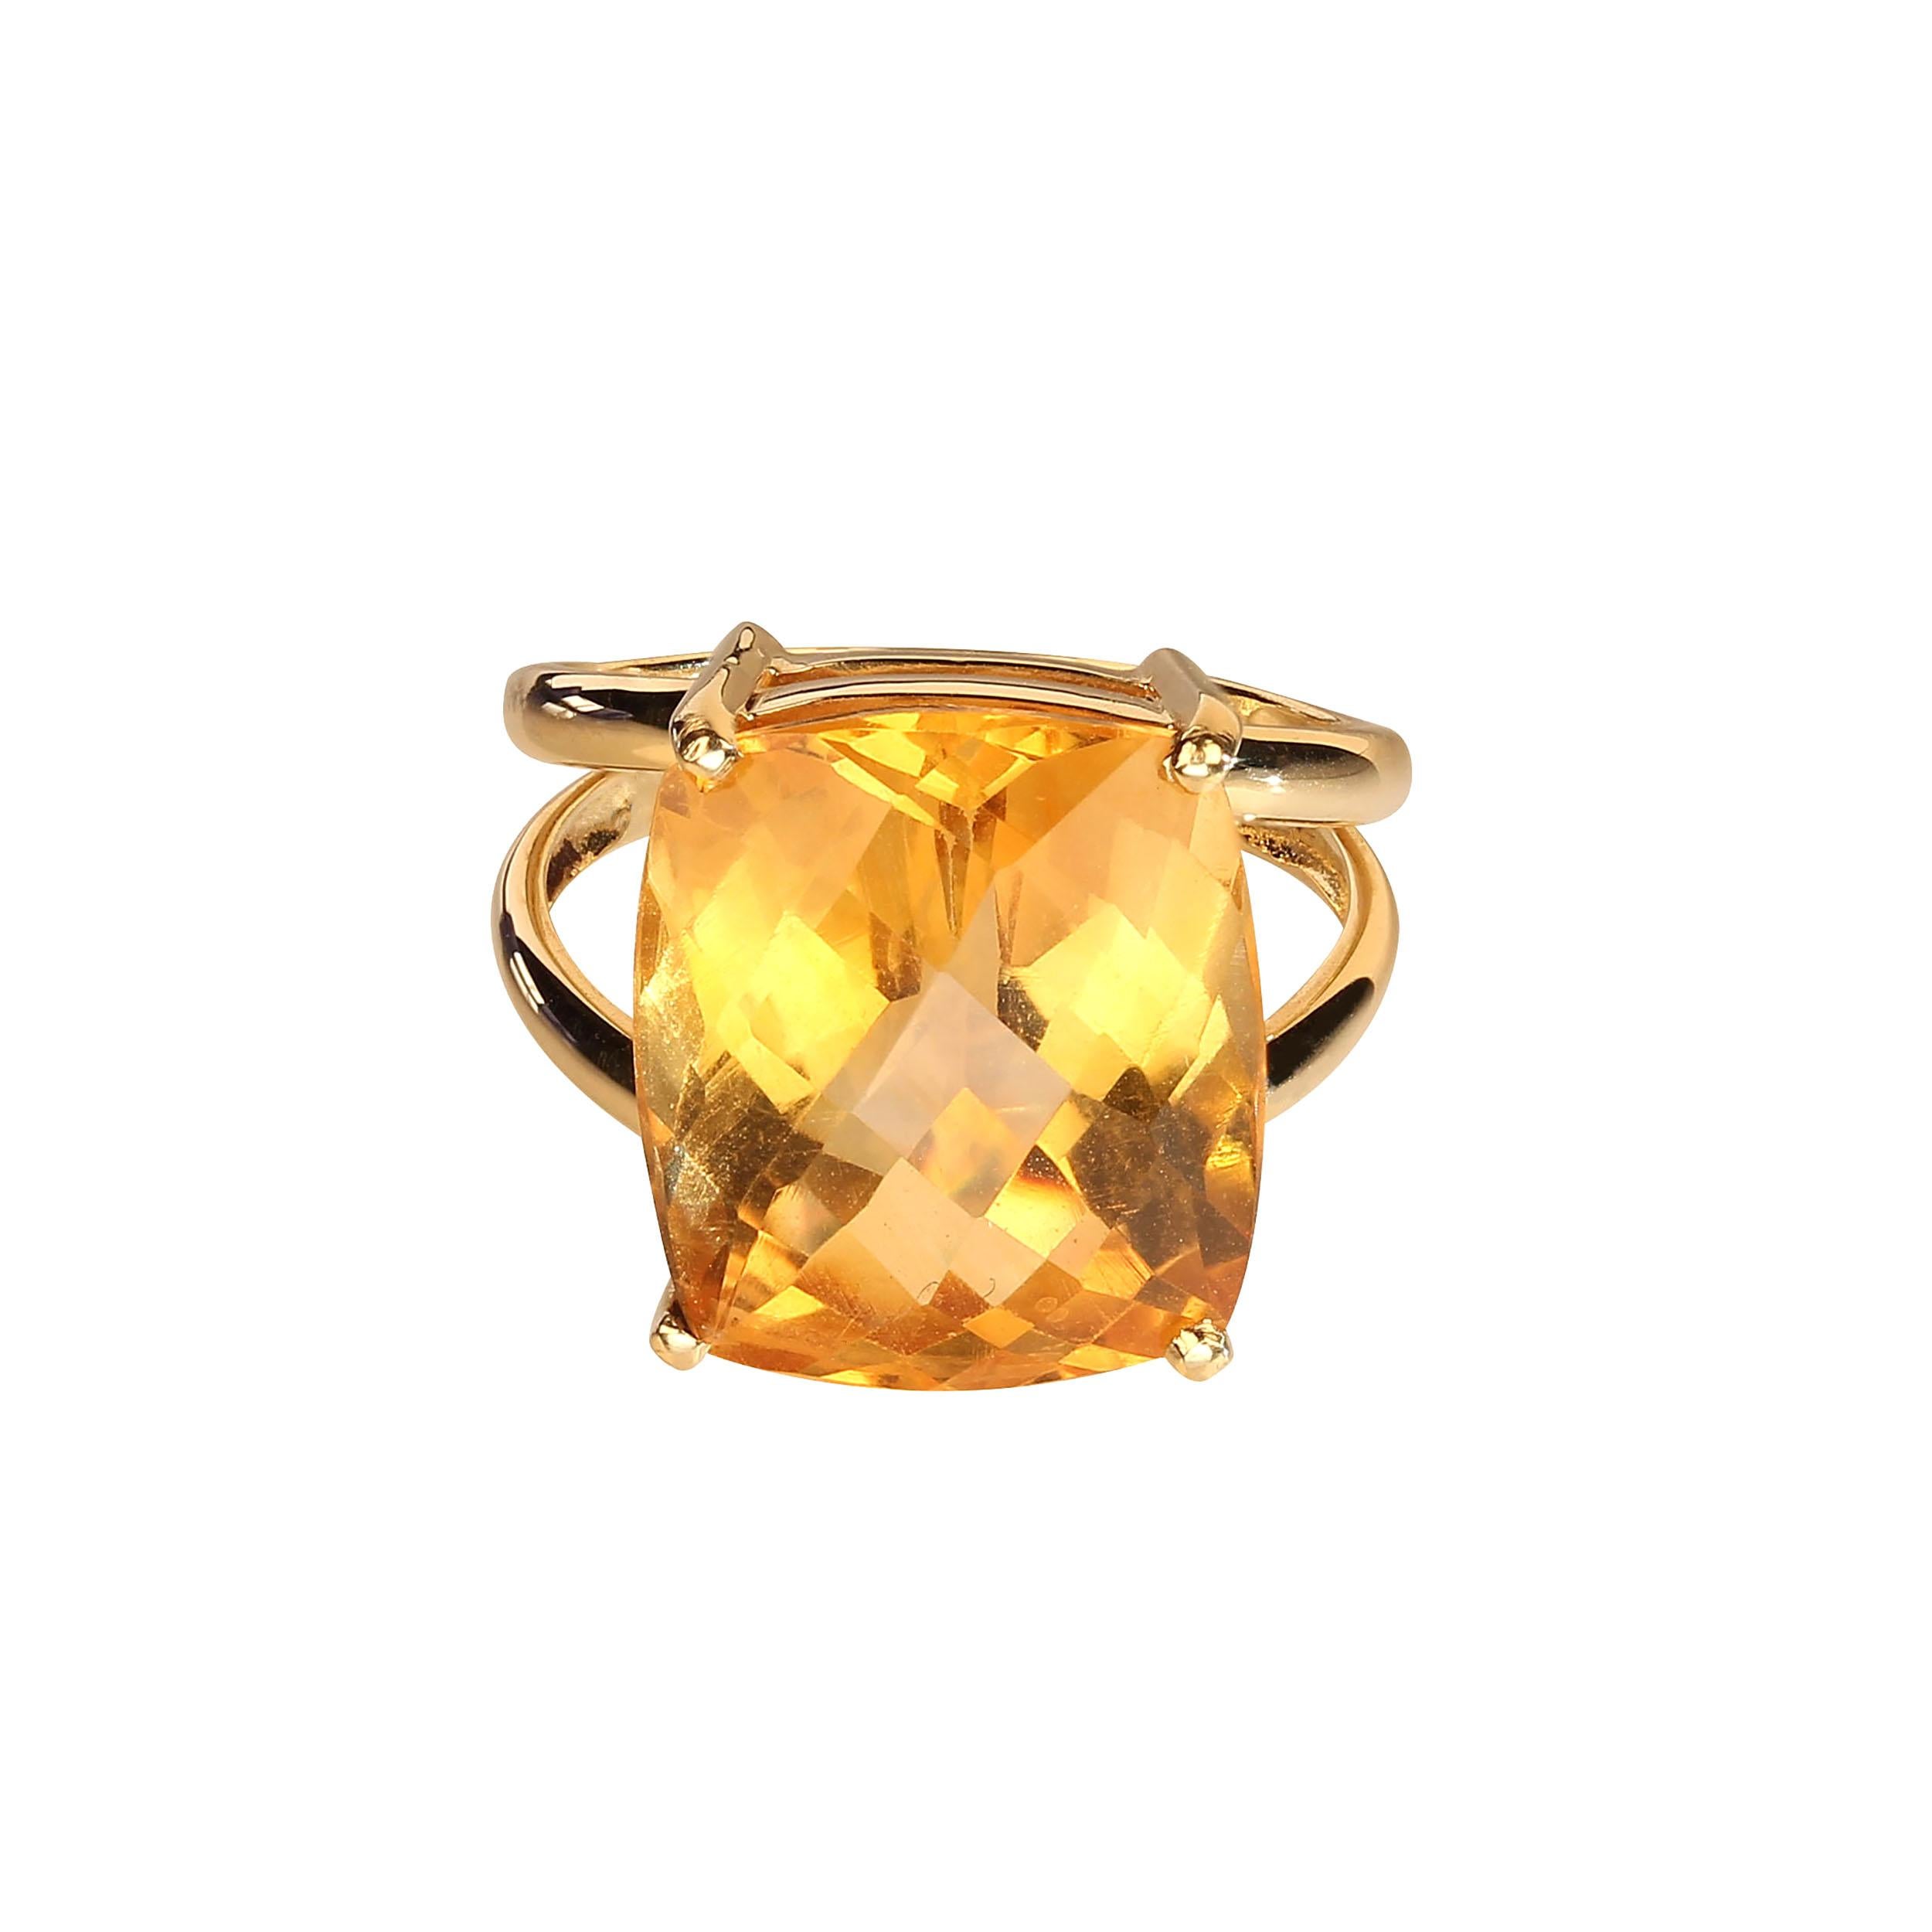 Bespoke 18K yellow gold ring with 10.61carat Citrine. This antique cut checkerboard table Citrine is a brilliant sun kissed gold. Set in the rich 18K yellow gold handmade setting this Citrine is the perfect November birthstone. This Citrine as well